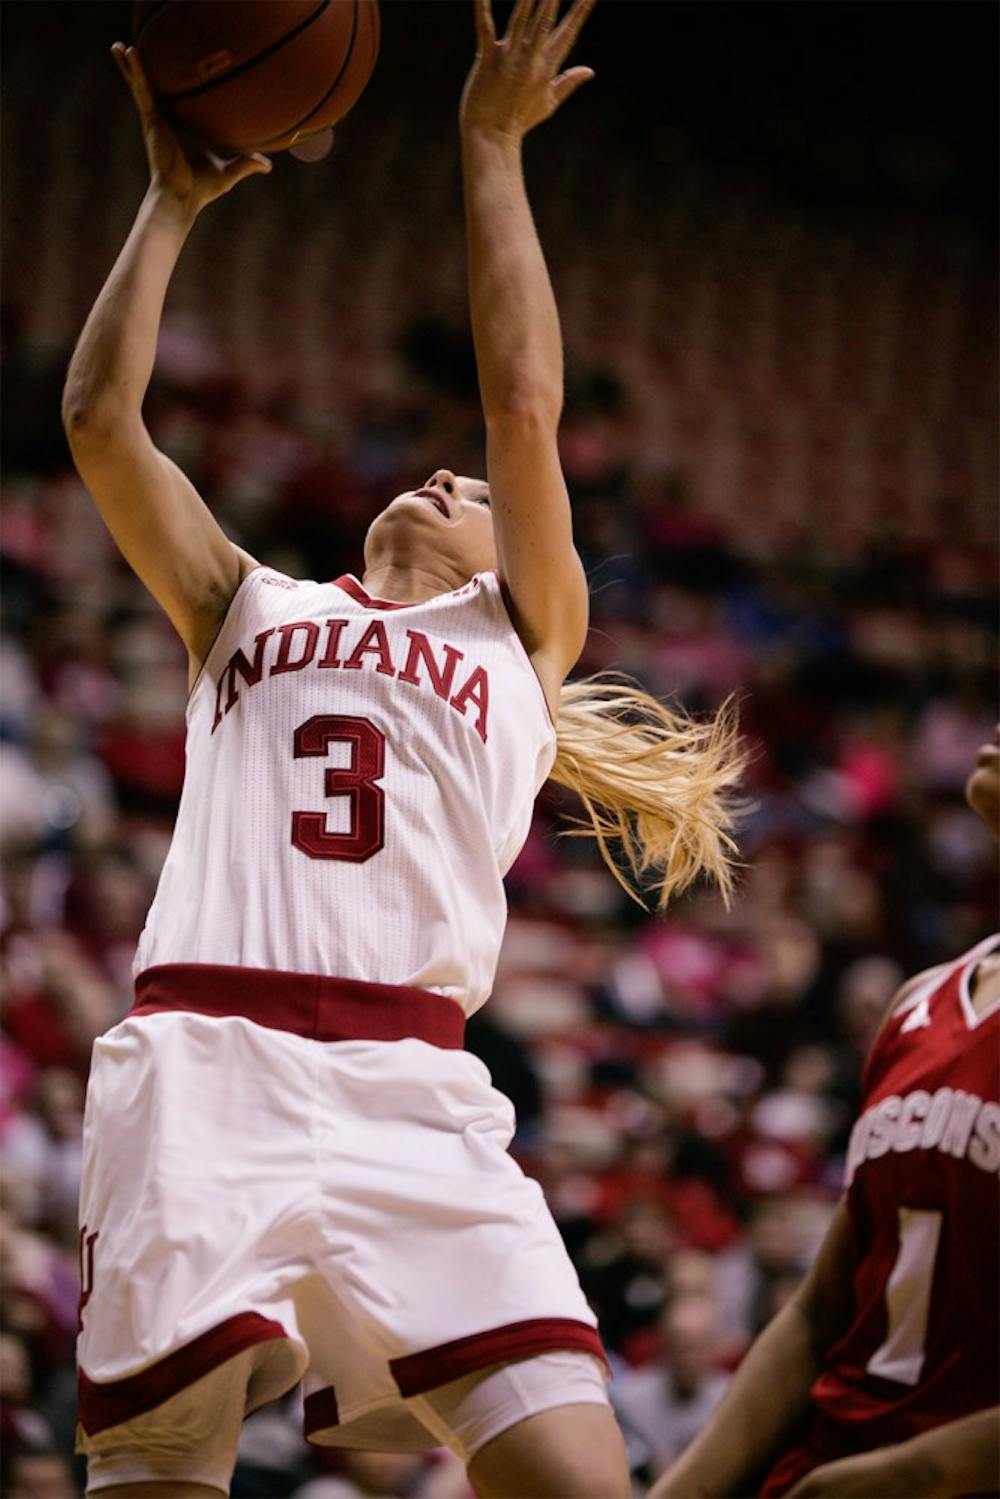 Sophomore guard Tyra Buss goes up to the basket to attempt a layup against Wisconsin. Buss scored 24 points against the Badgers, leading the Hoosiers to a 67-57 victory Sunday at Assembly Hall.